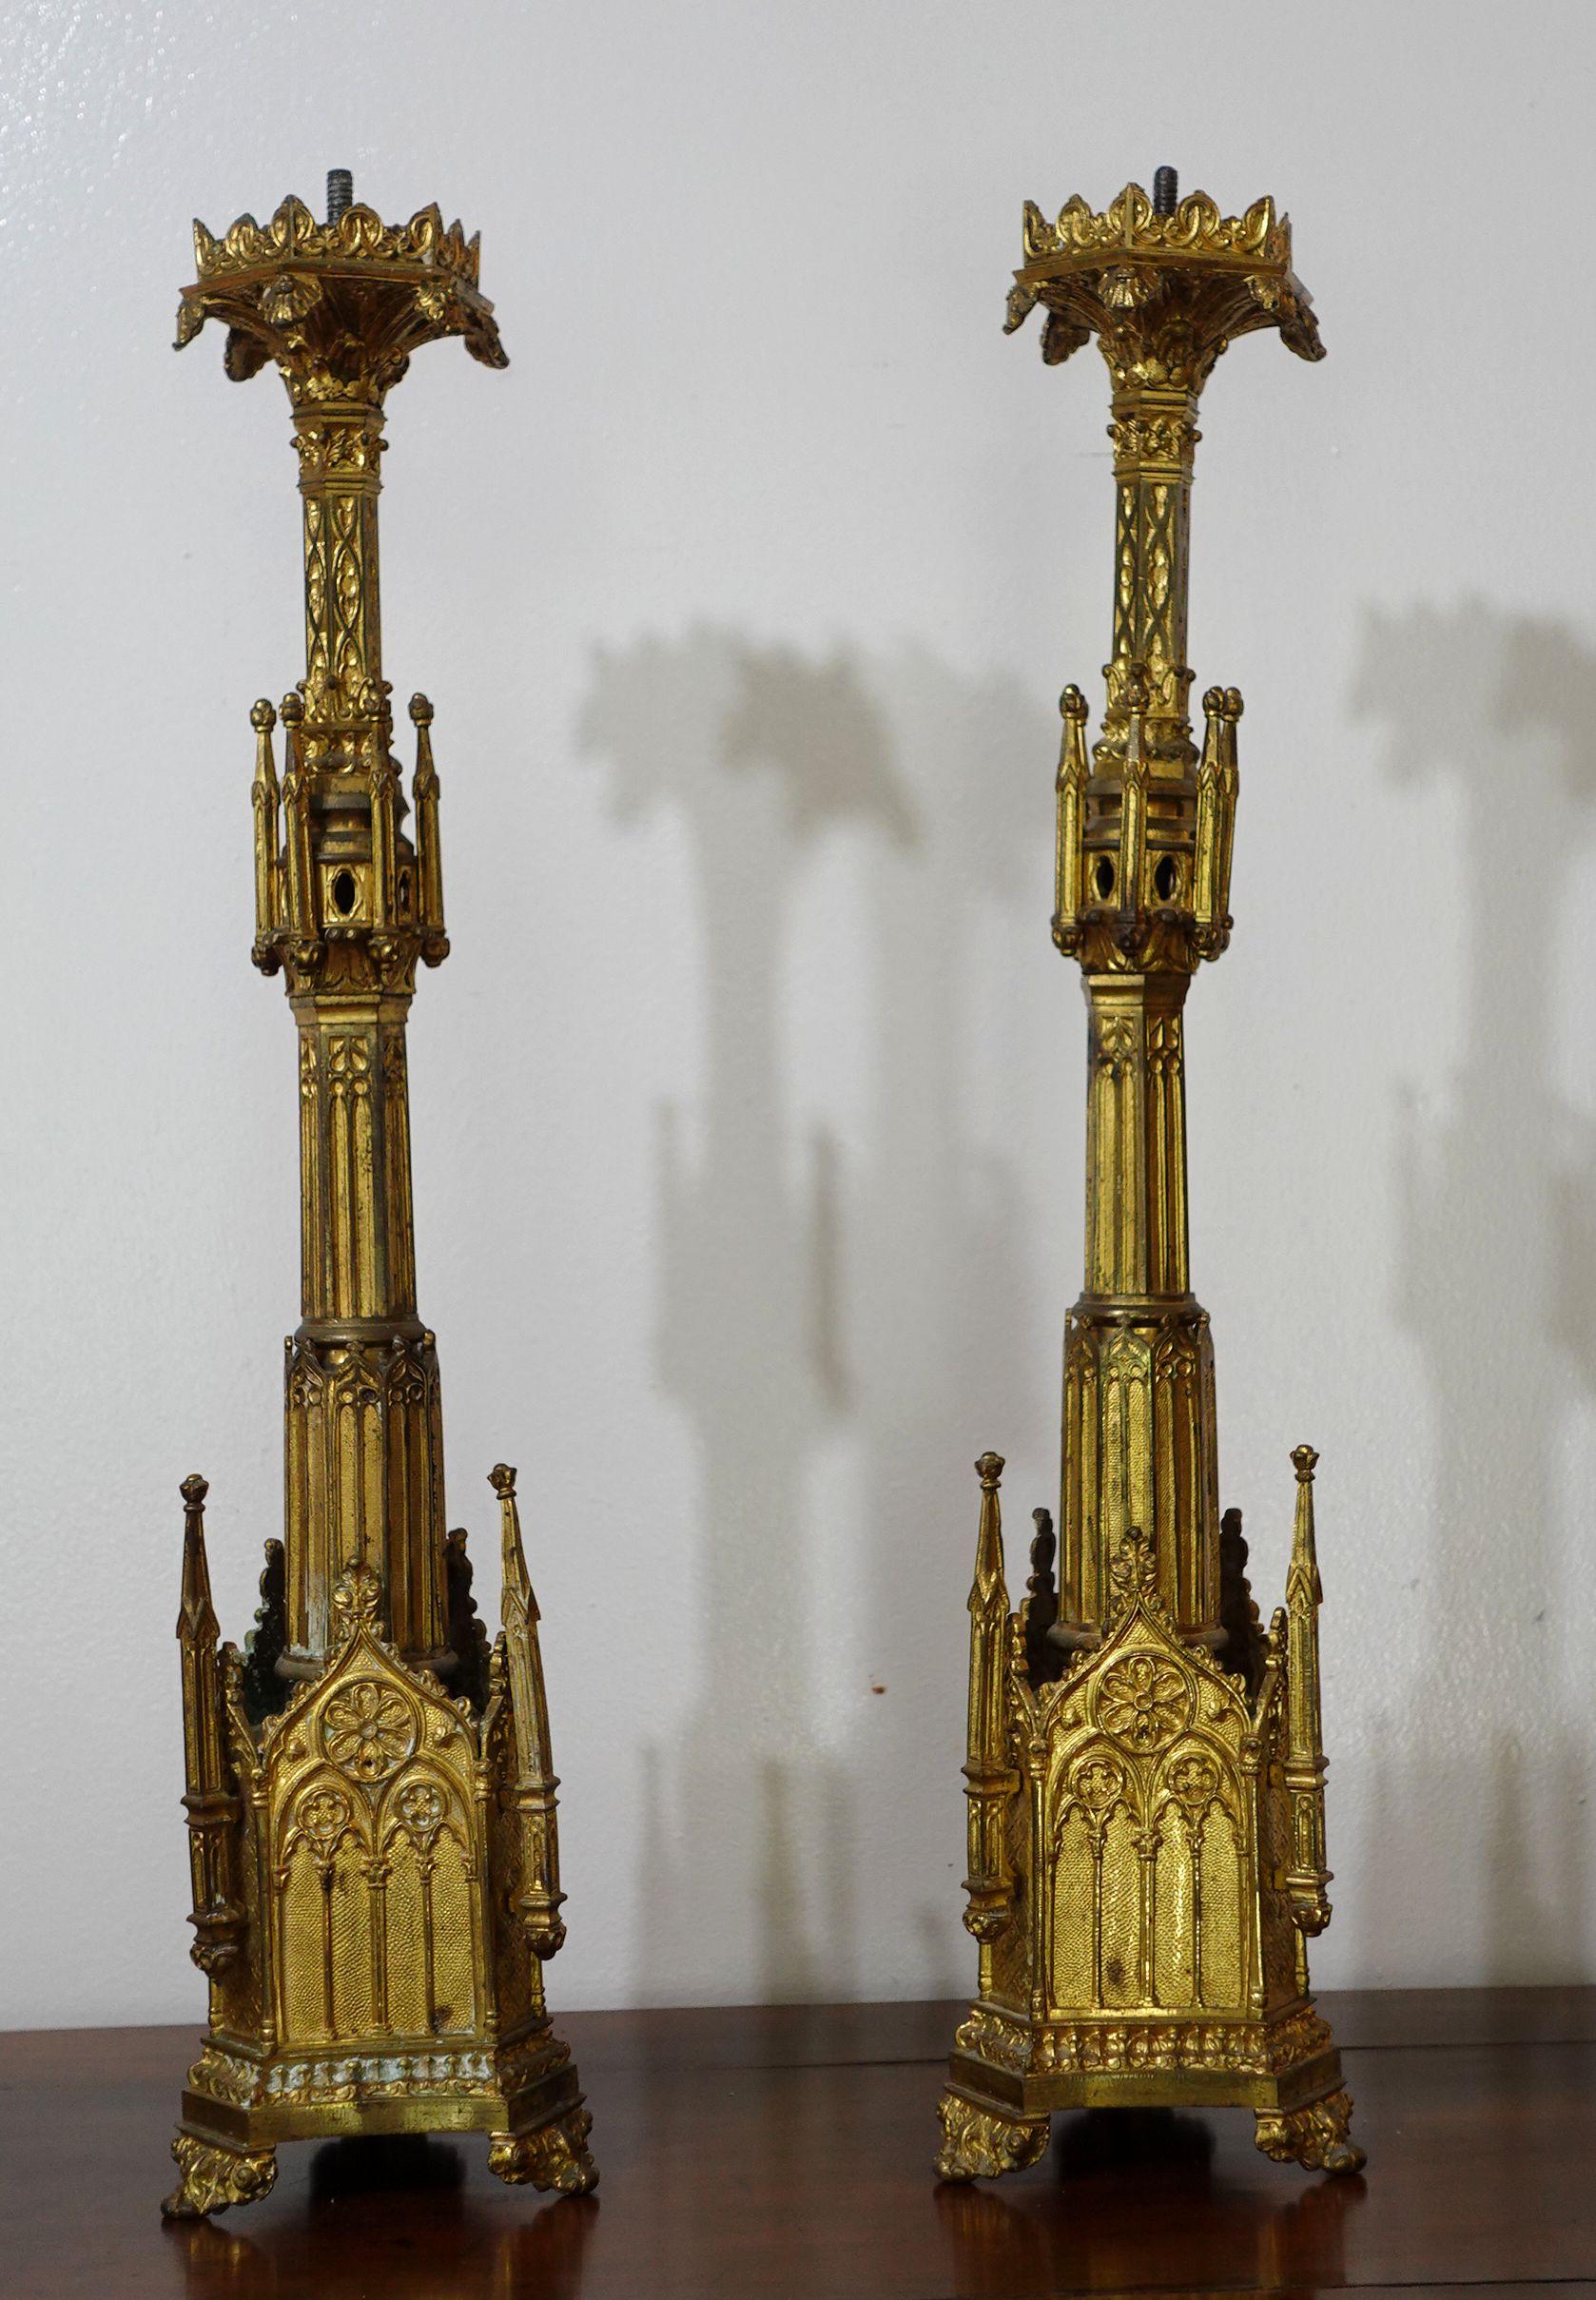 Antique pair of Gothic Cathedral motif brass prickets - Church/Altar candlesticks with gothic architectural design elements.
Ric.0042.
 